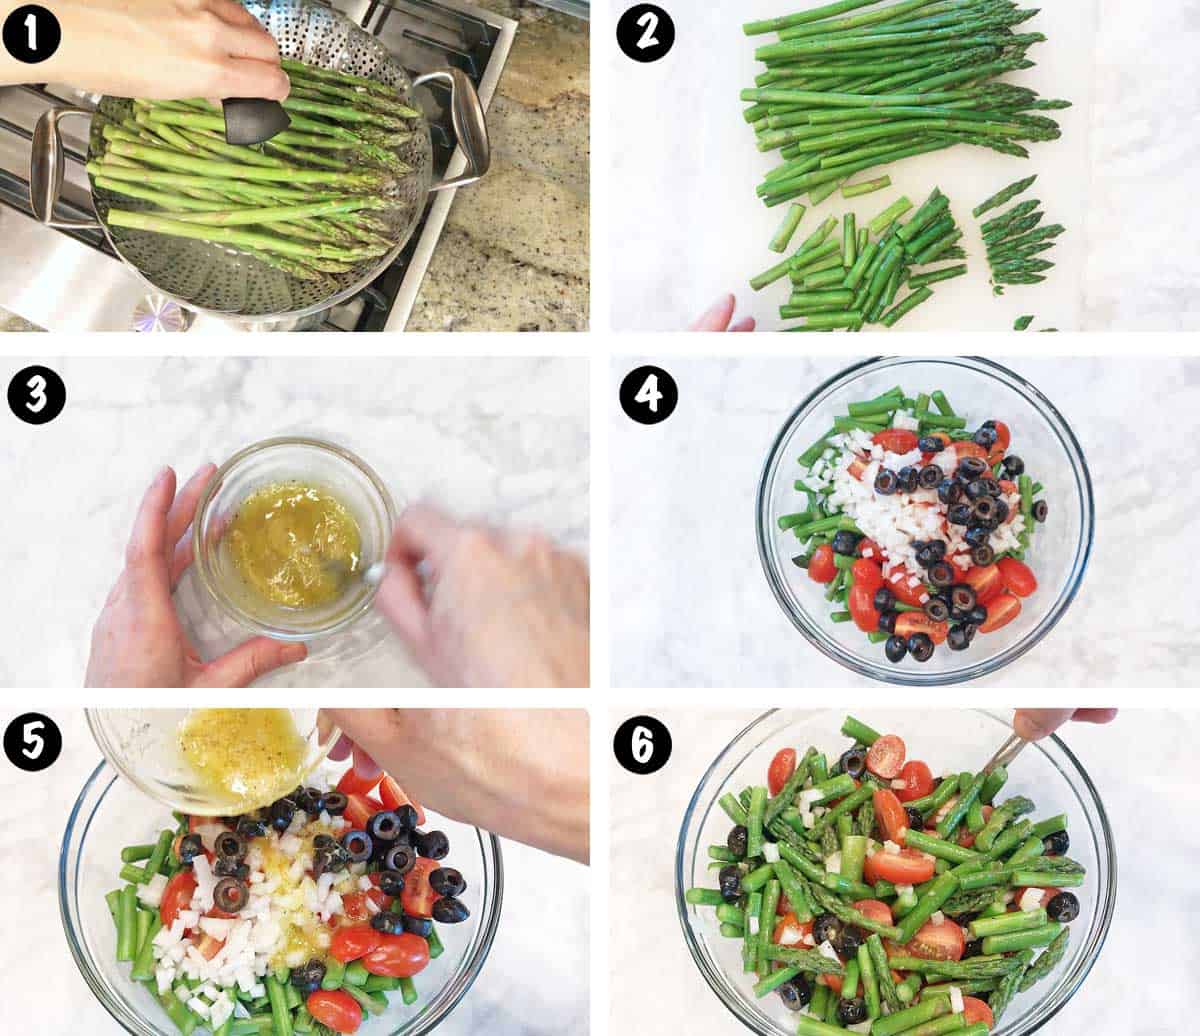 A six-photo collage showing the steps for making asparagus salad. 